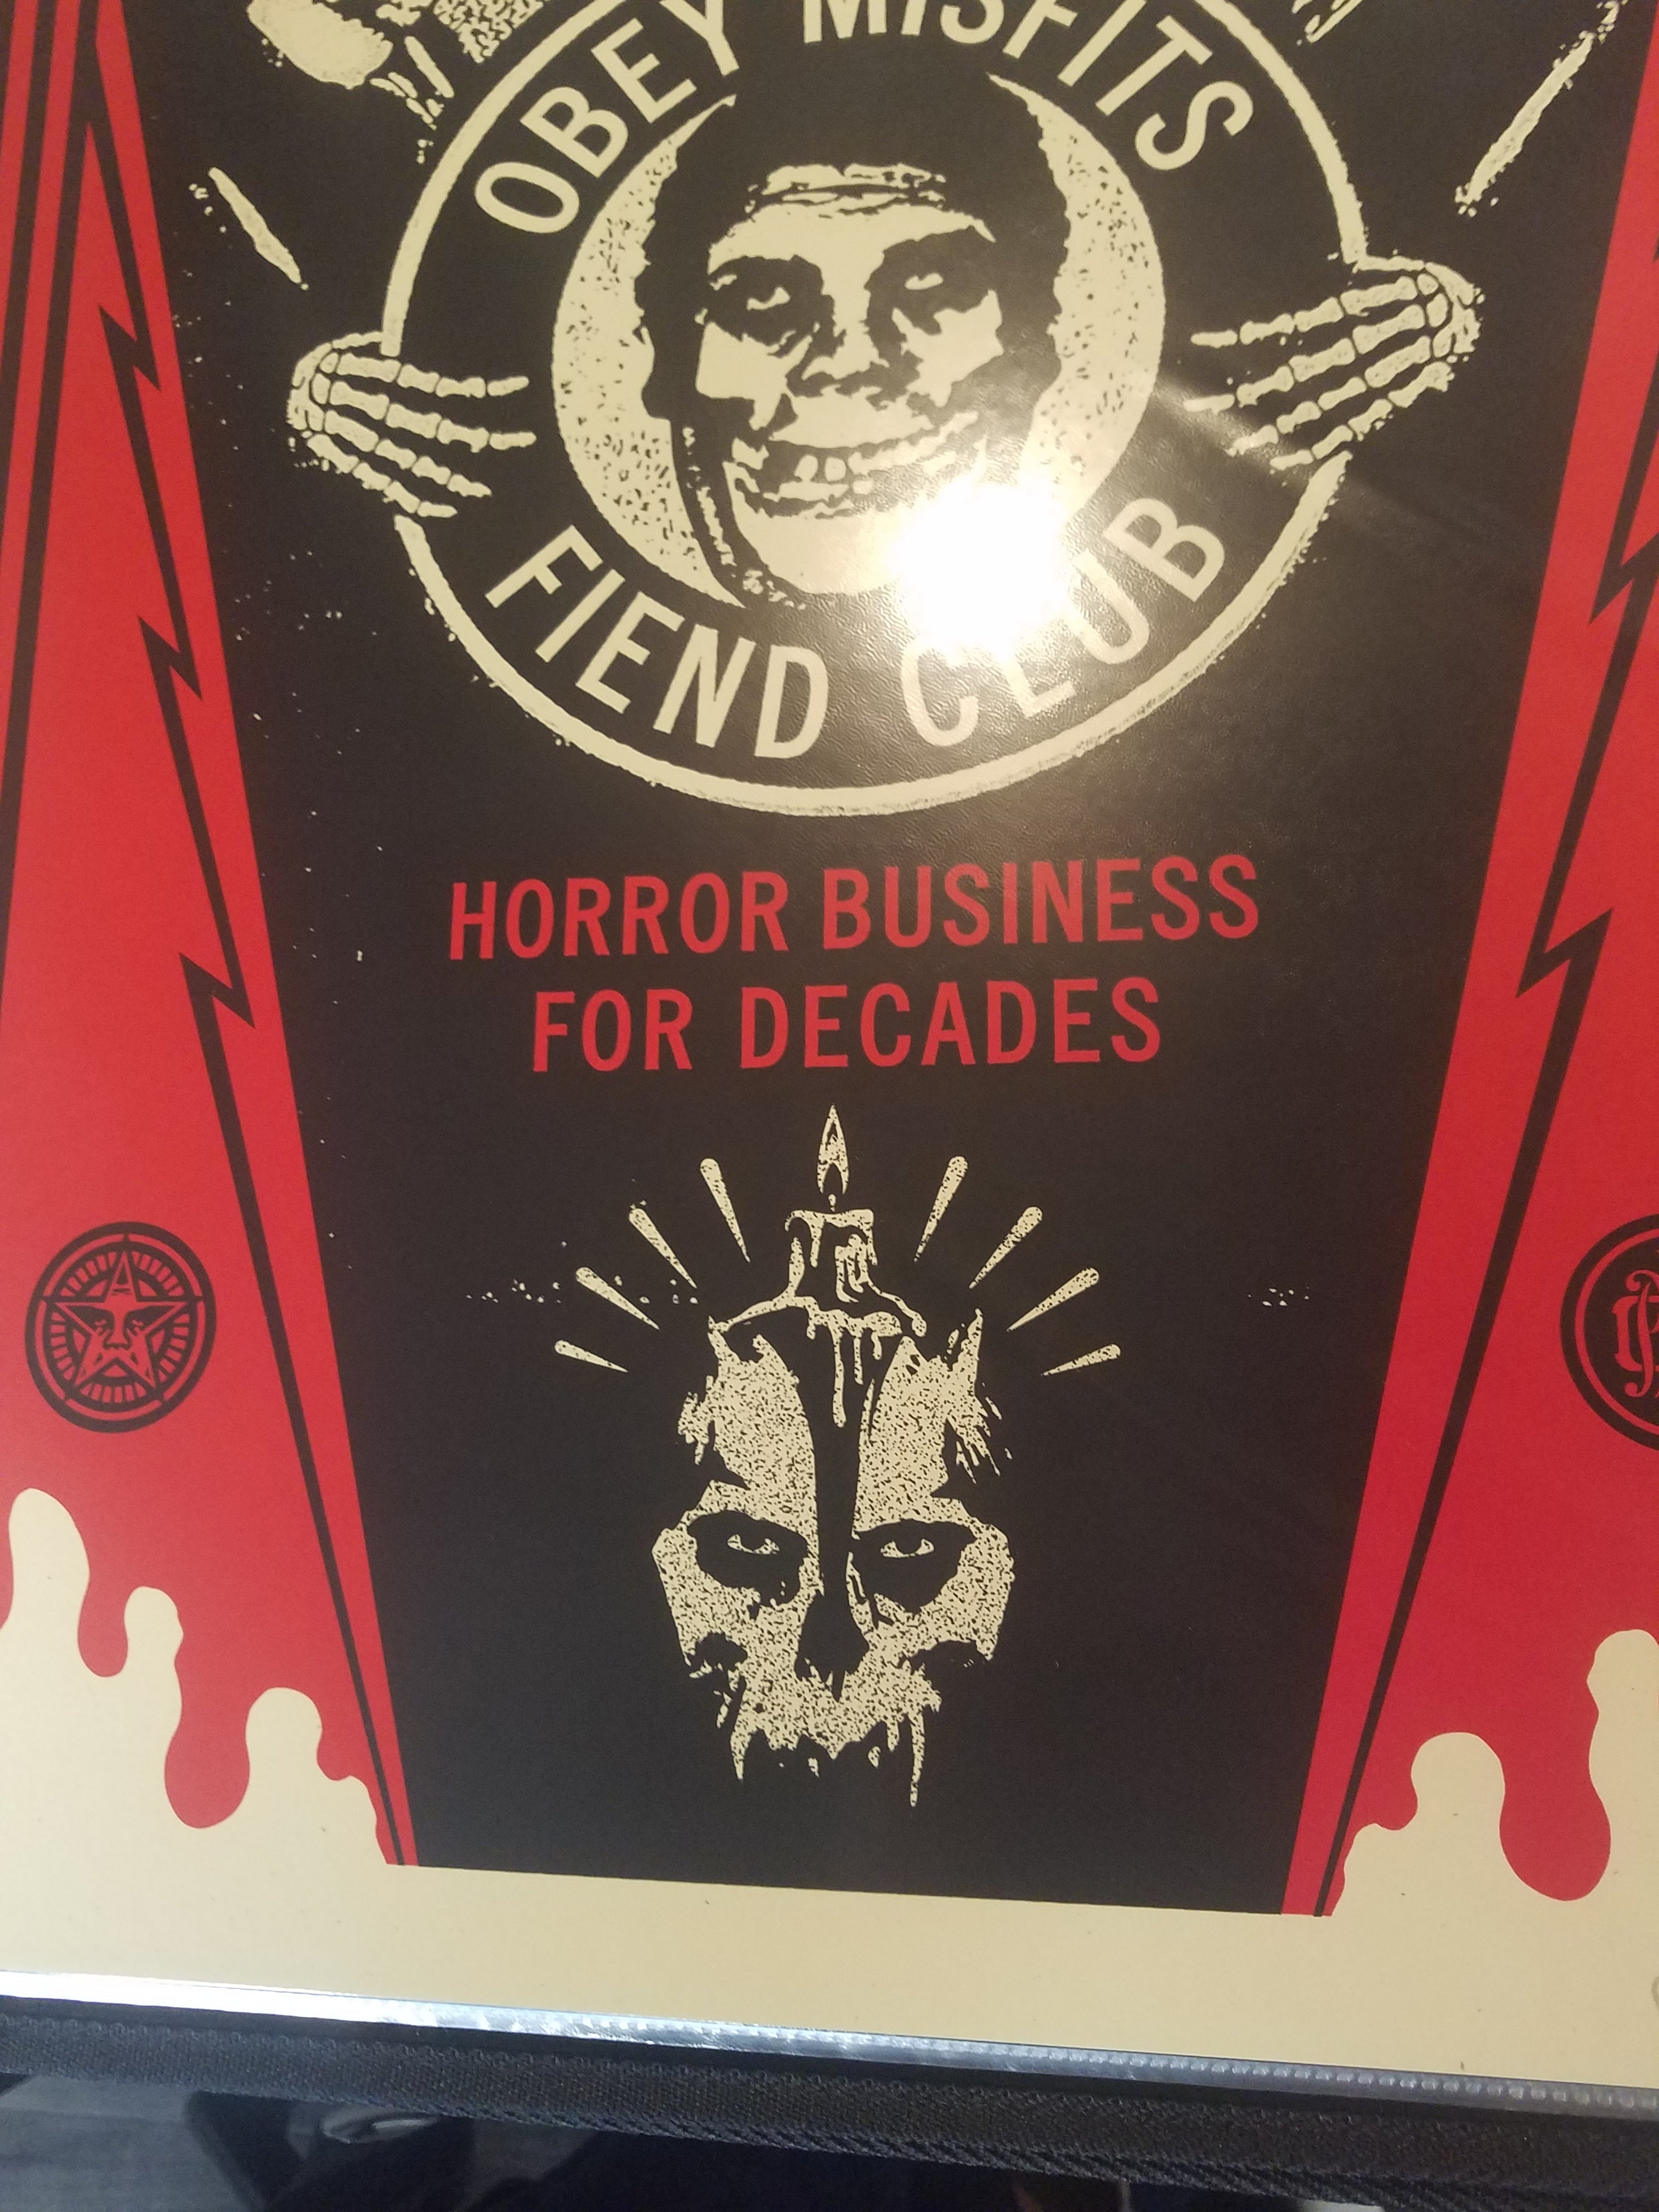 Products Shepard Fairey Misfits Horror Business Tomb 2018 S/Ned of 450 Screenprint Poster